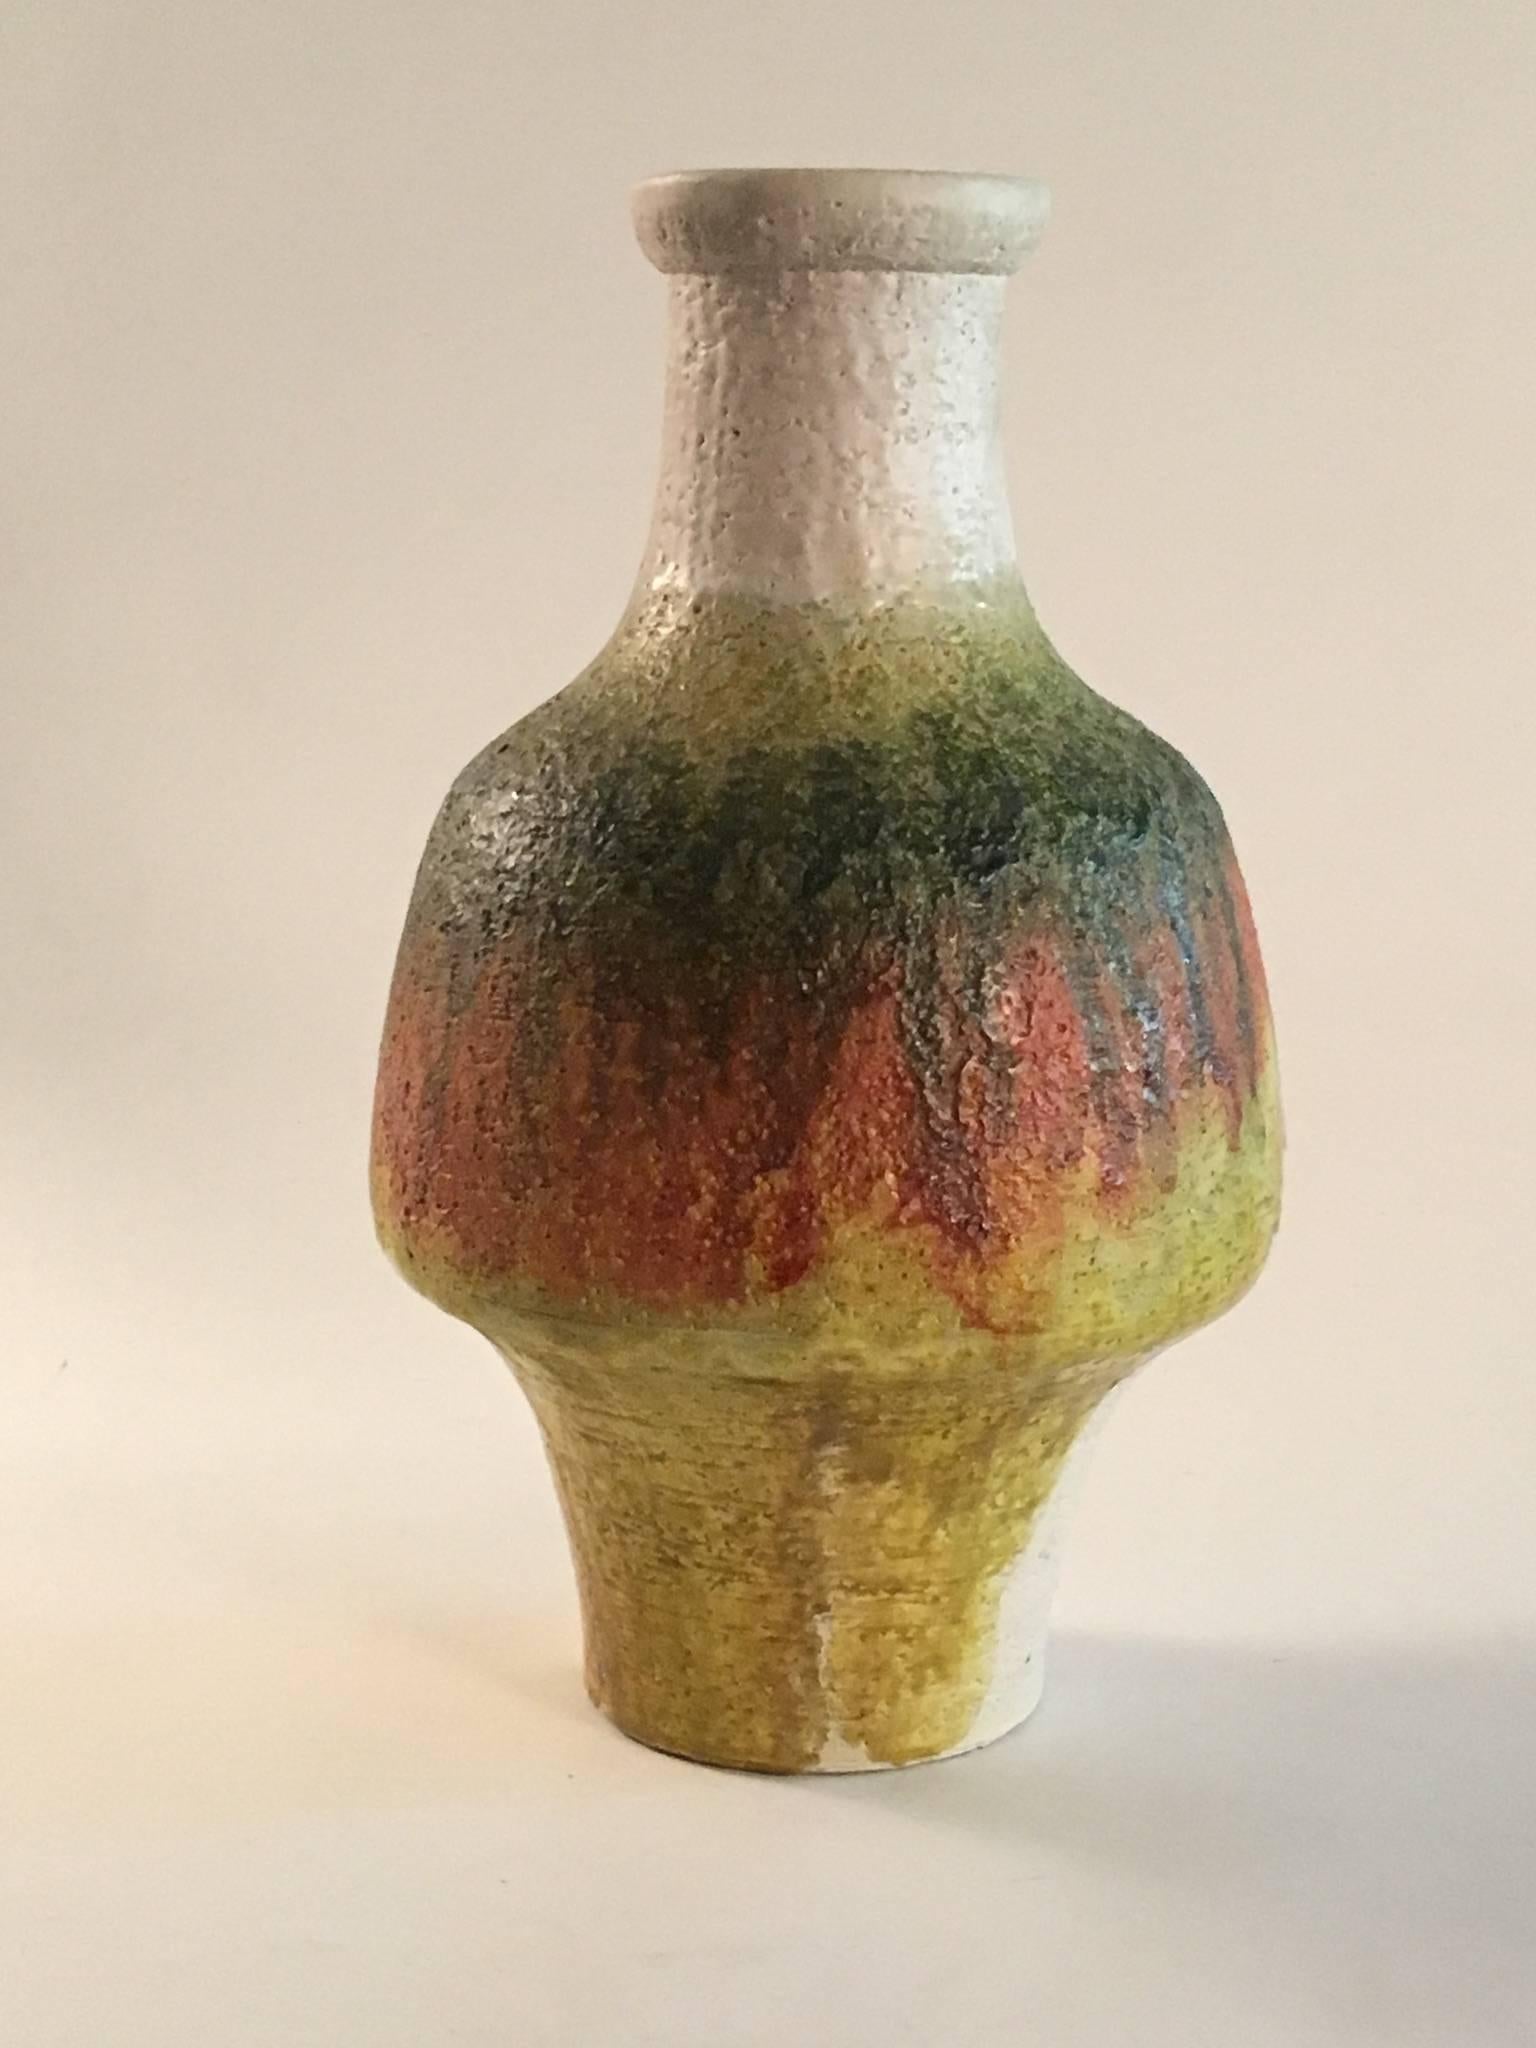 A lovely signed Marcello Fantoni waisted shape vase of large size. Decorated with dripping matt glazes of green, orange and yellow over a cream body. Signed underneath. Perfect condition.